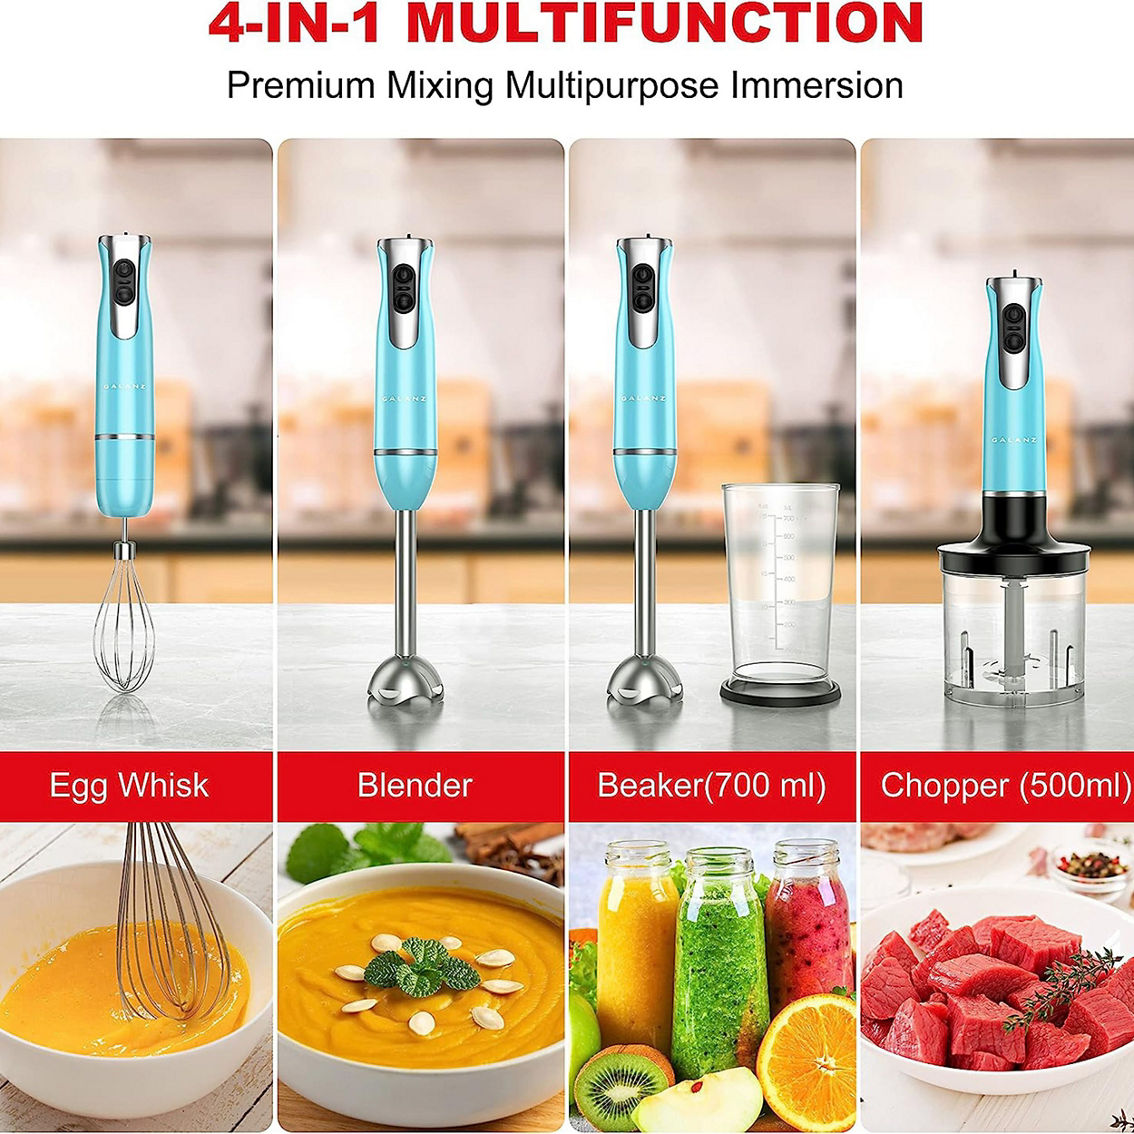 Galanz 2 Speed Multi-Function Retro Immersion Hand Blender in Bebop Blue - Image 3 of 5